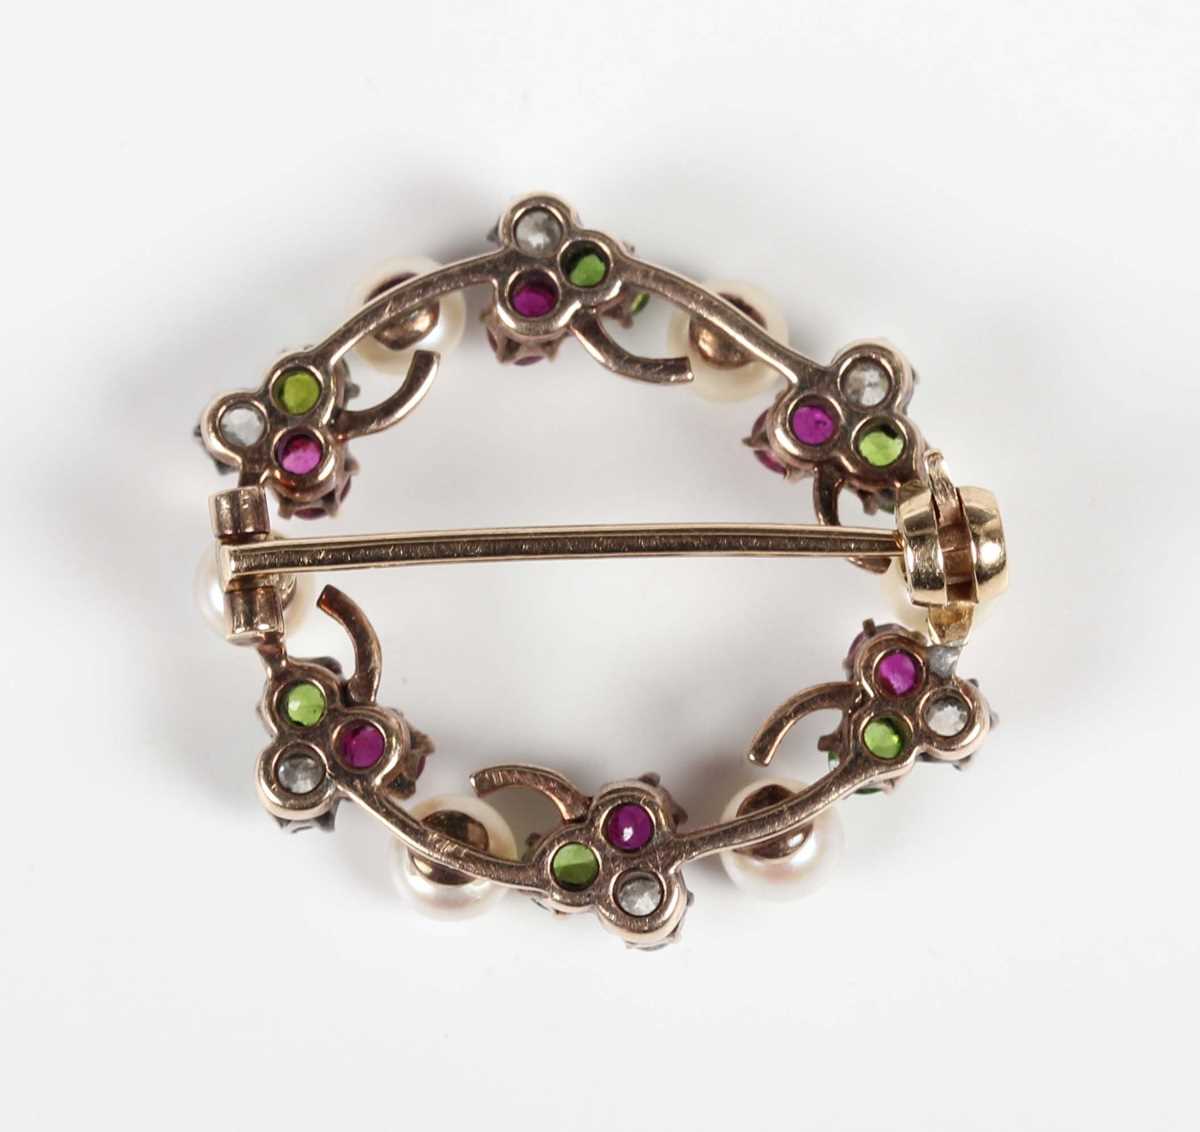 A gold backed, diamond, ruby, demantoid garnet and pearl brooch, designed as a wreath with trefoil - Image 2 of 5